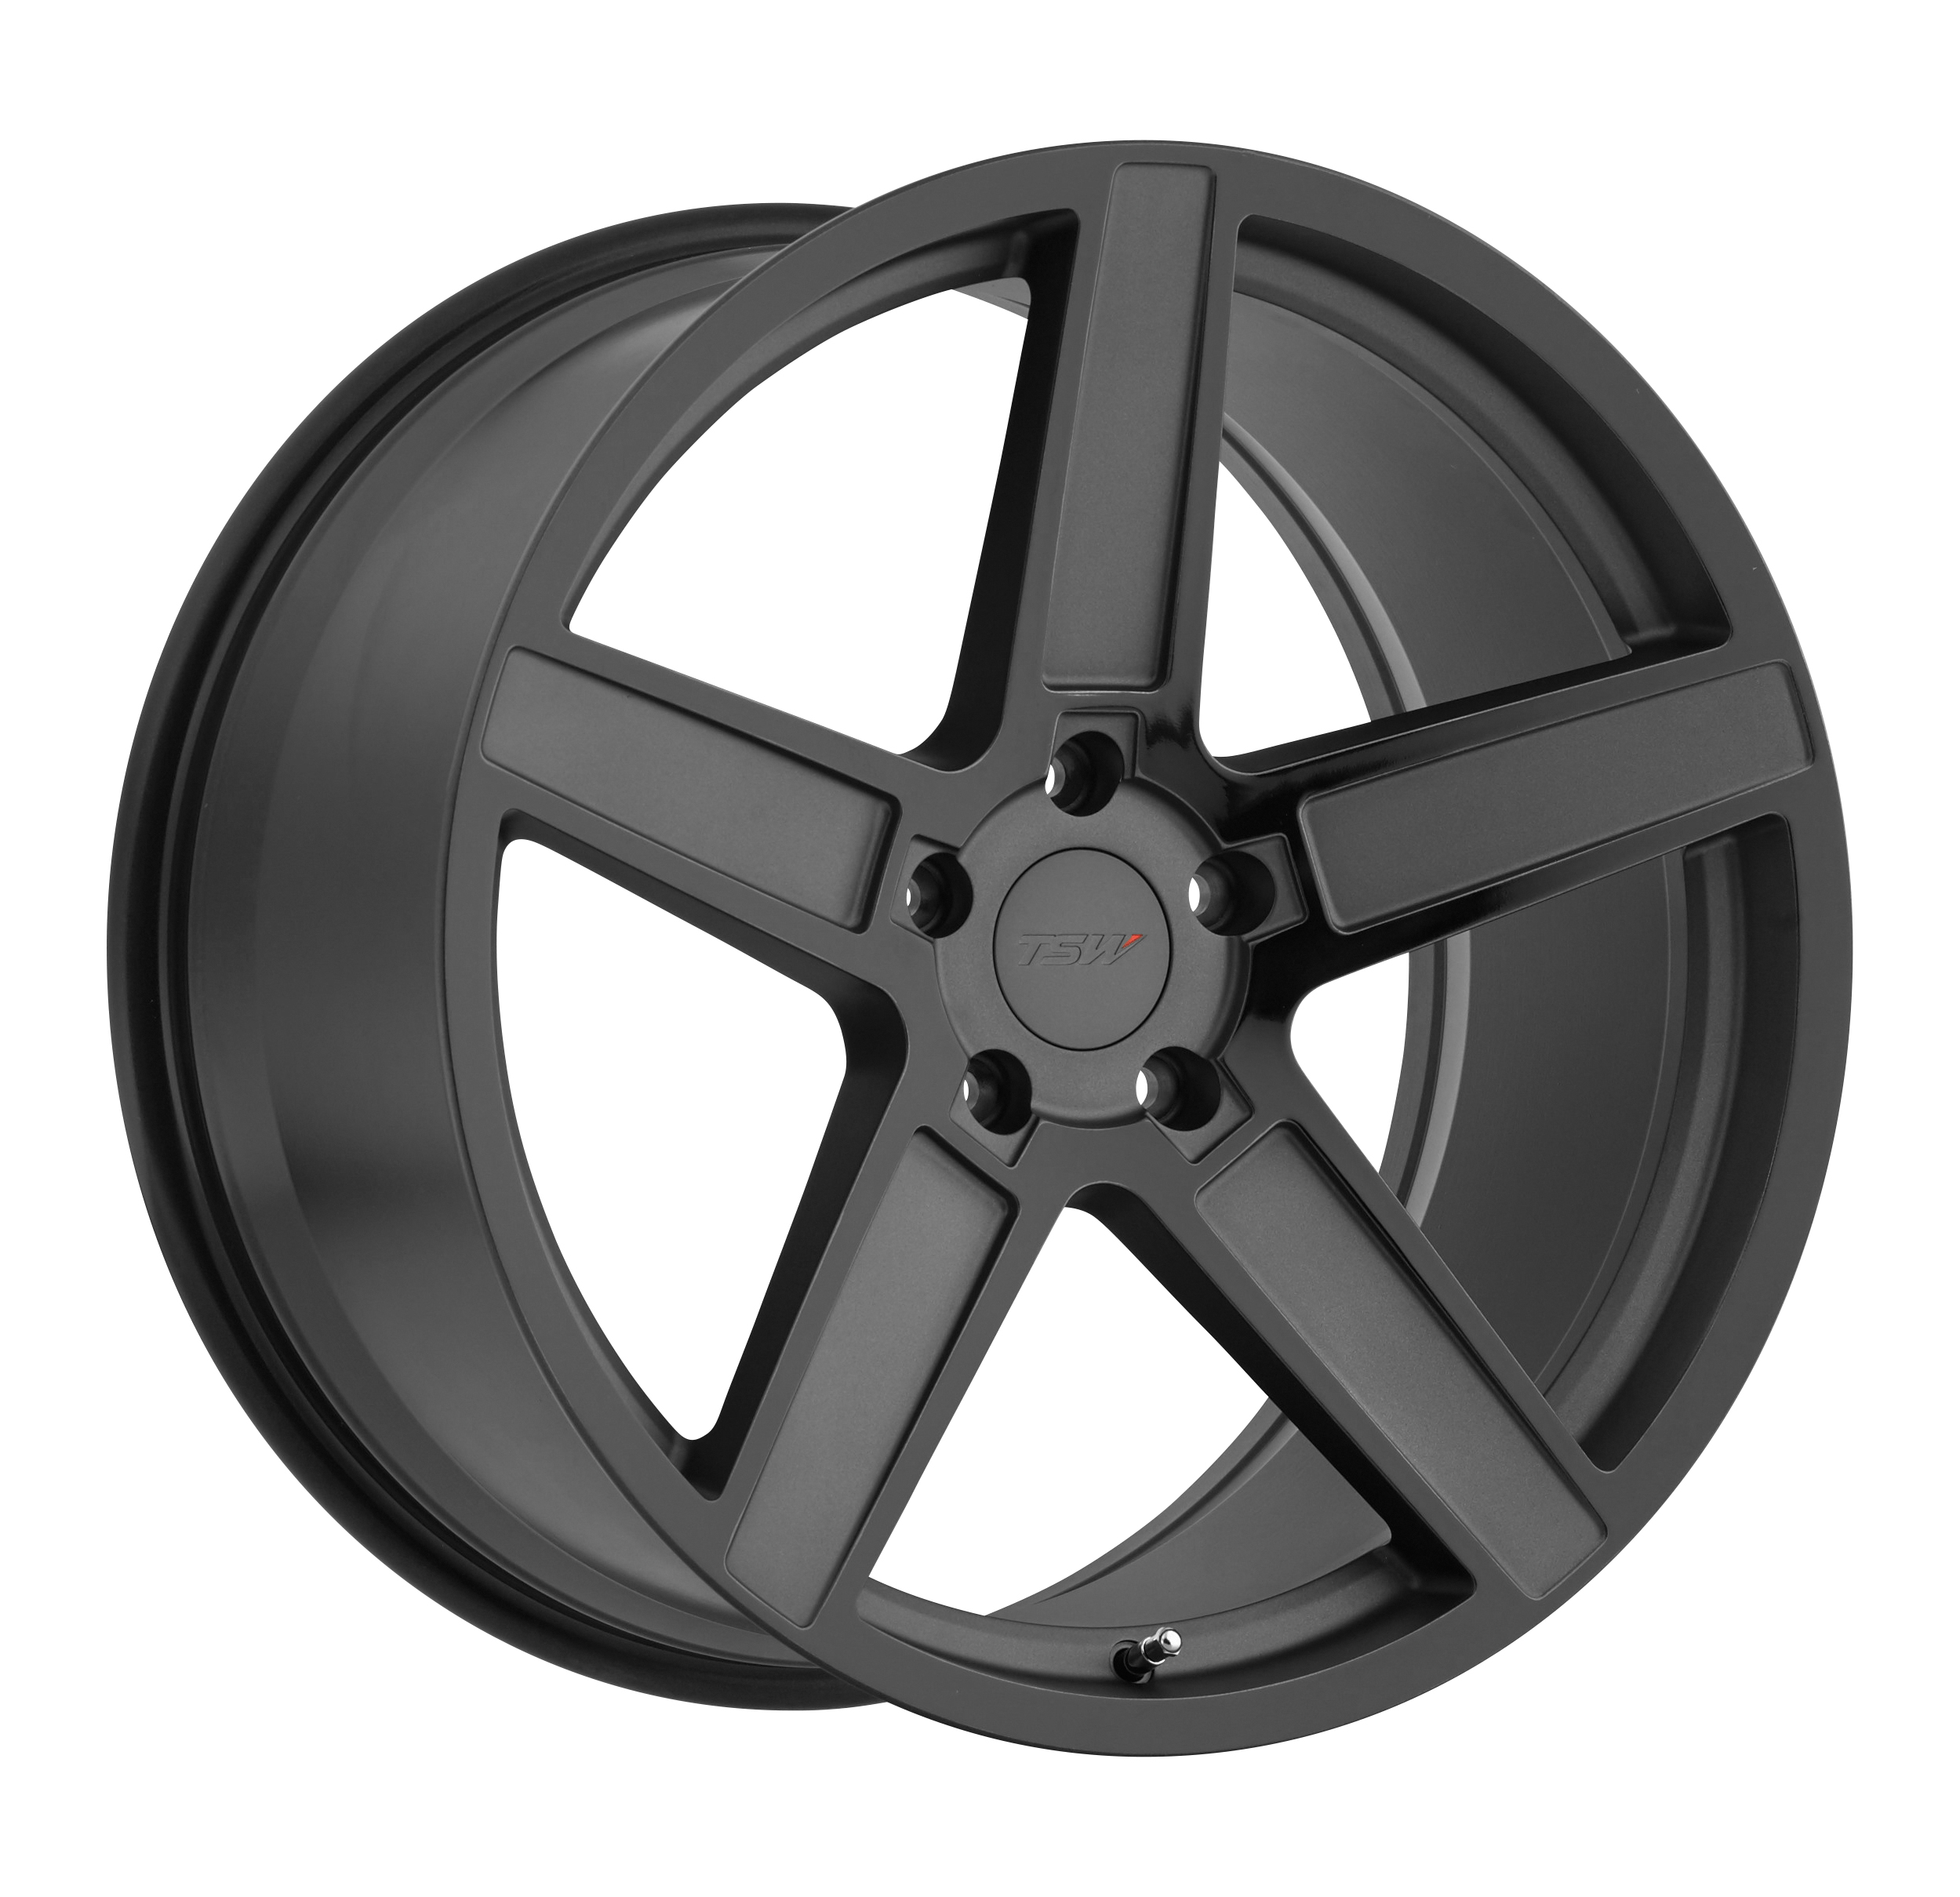 TSW Alloy Wheels- Ascent in matte gunmetal with gloss black face